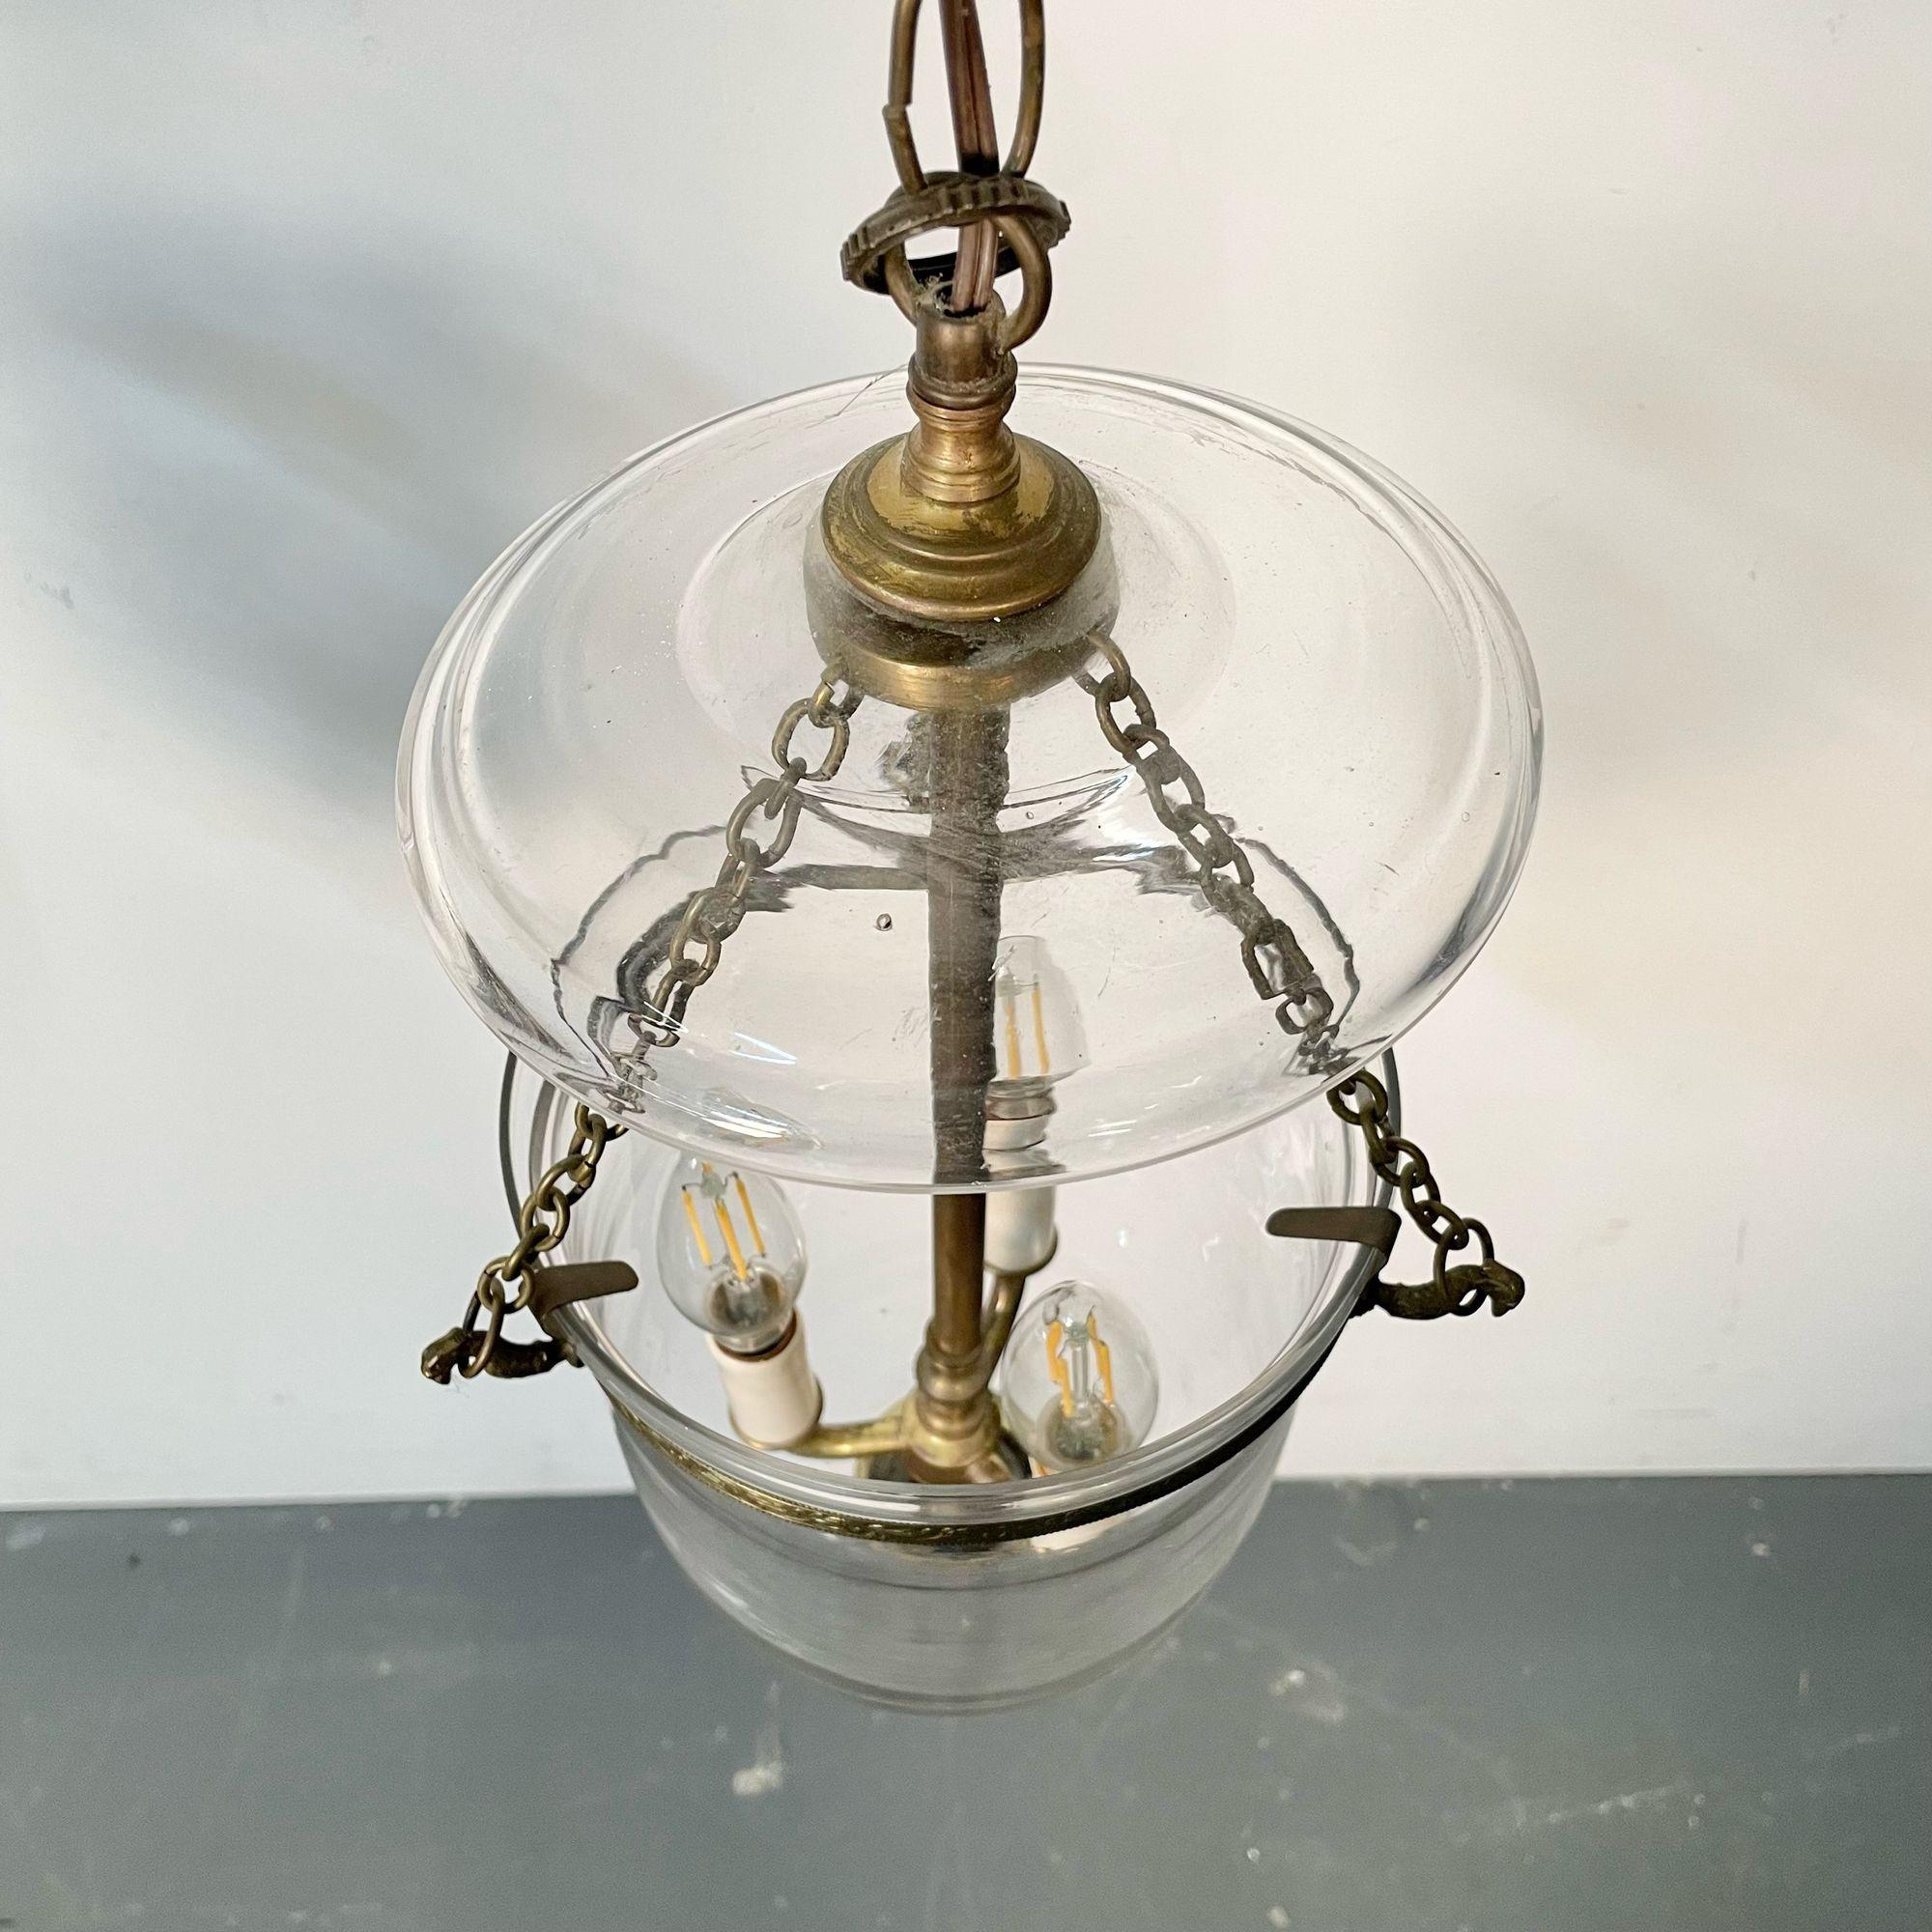 20th Century Pair Bell Jar Lanterns or Pendants, Brass and Glass, Domed